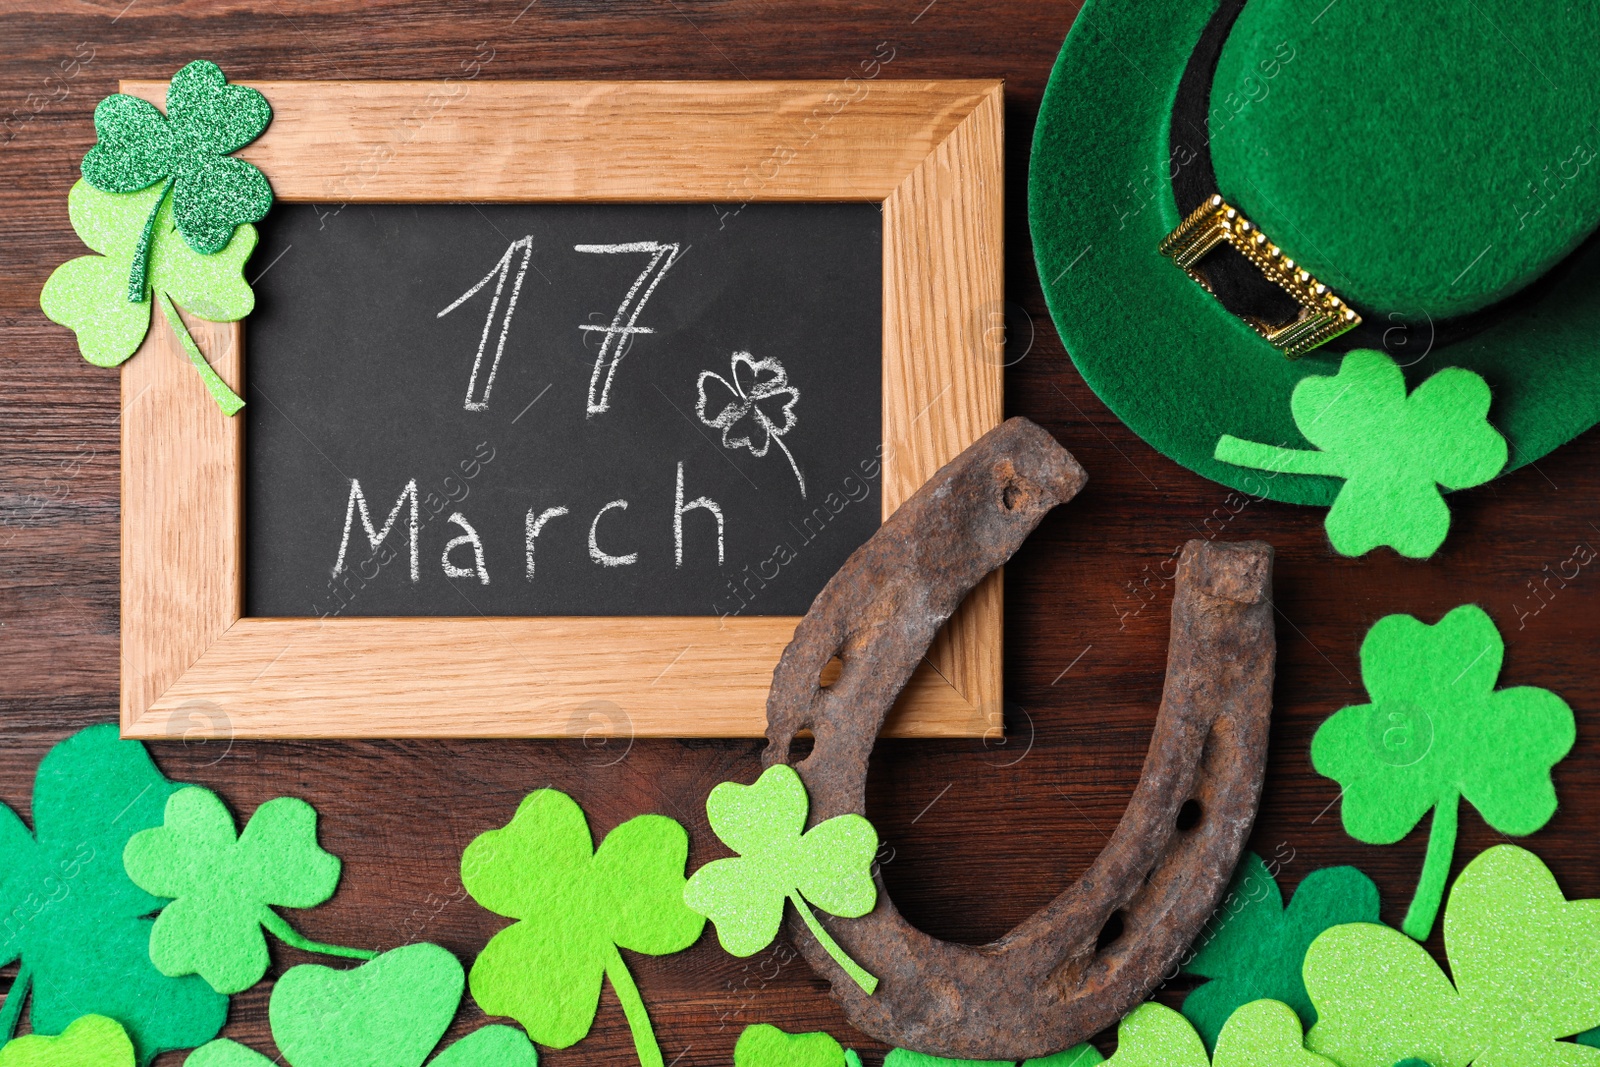 Photo of Flat lay composition with horseshoe and chalkboard on wooden background. St. Patrick's Day celebration